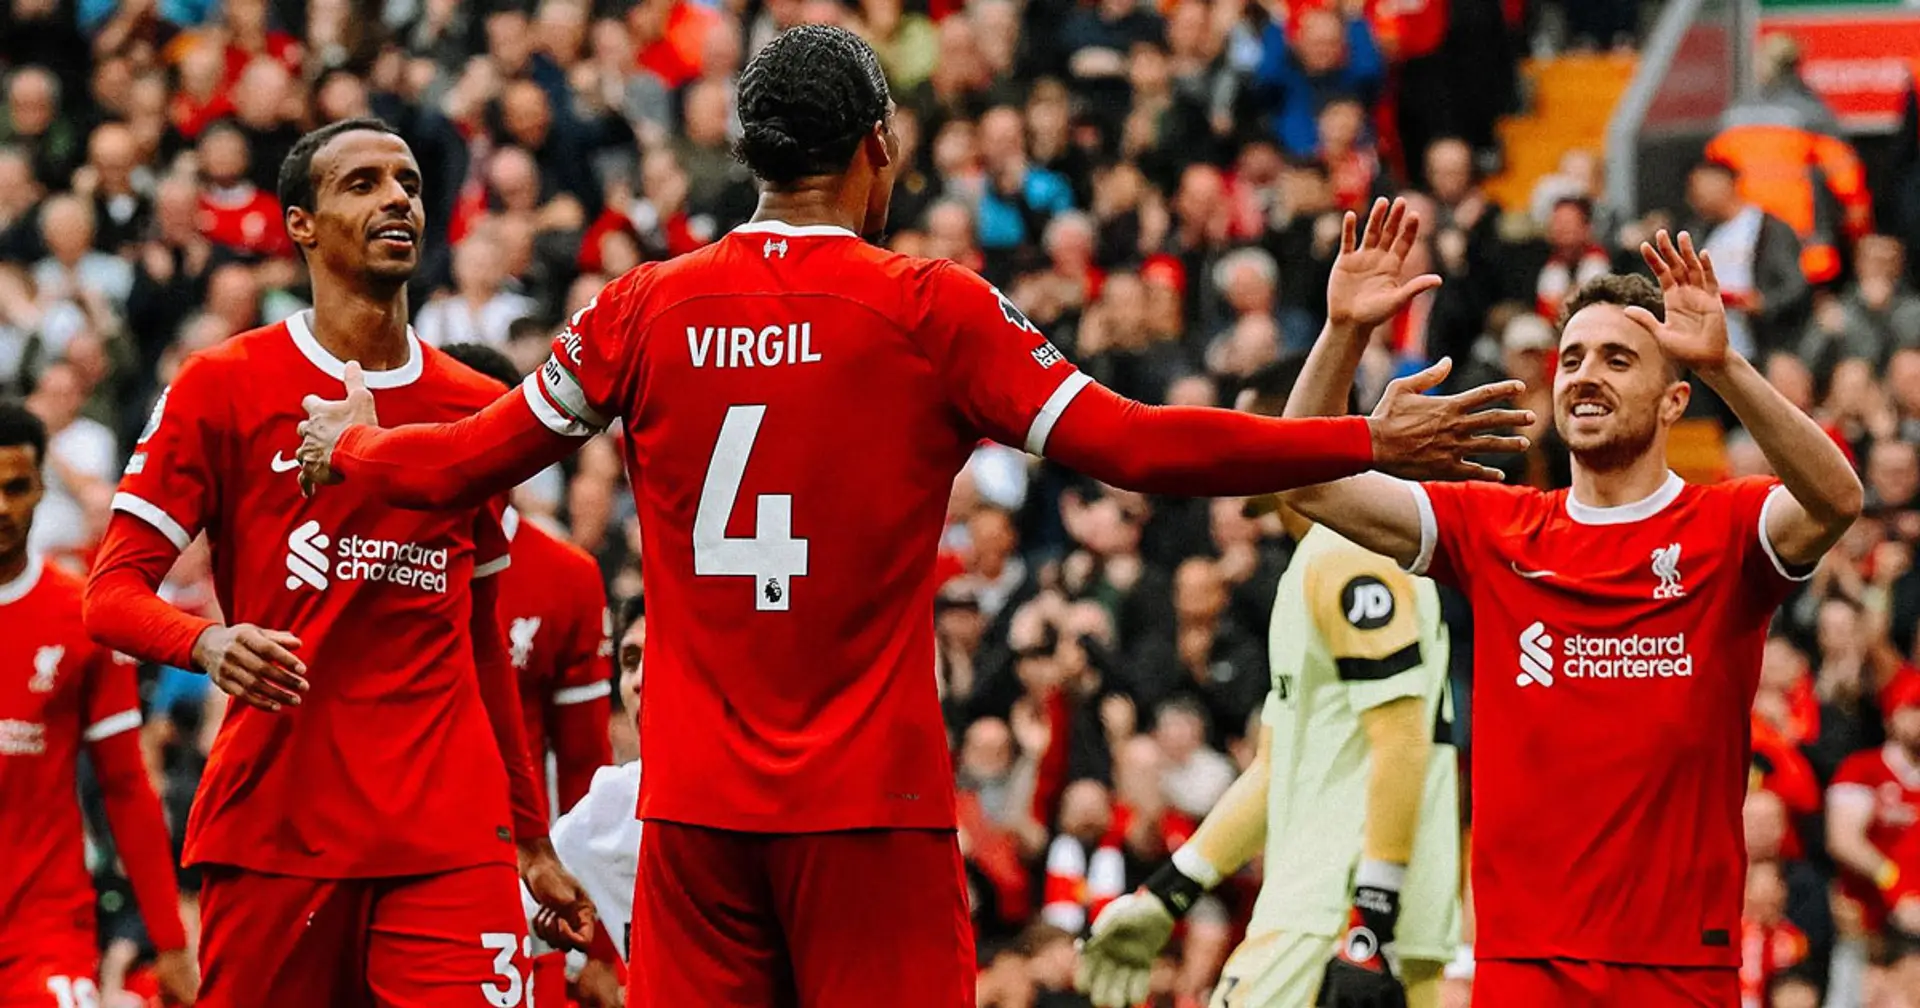 Which under-used Liverpool player should start against Leicester City and why?